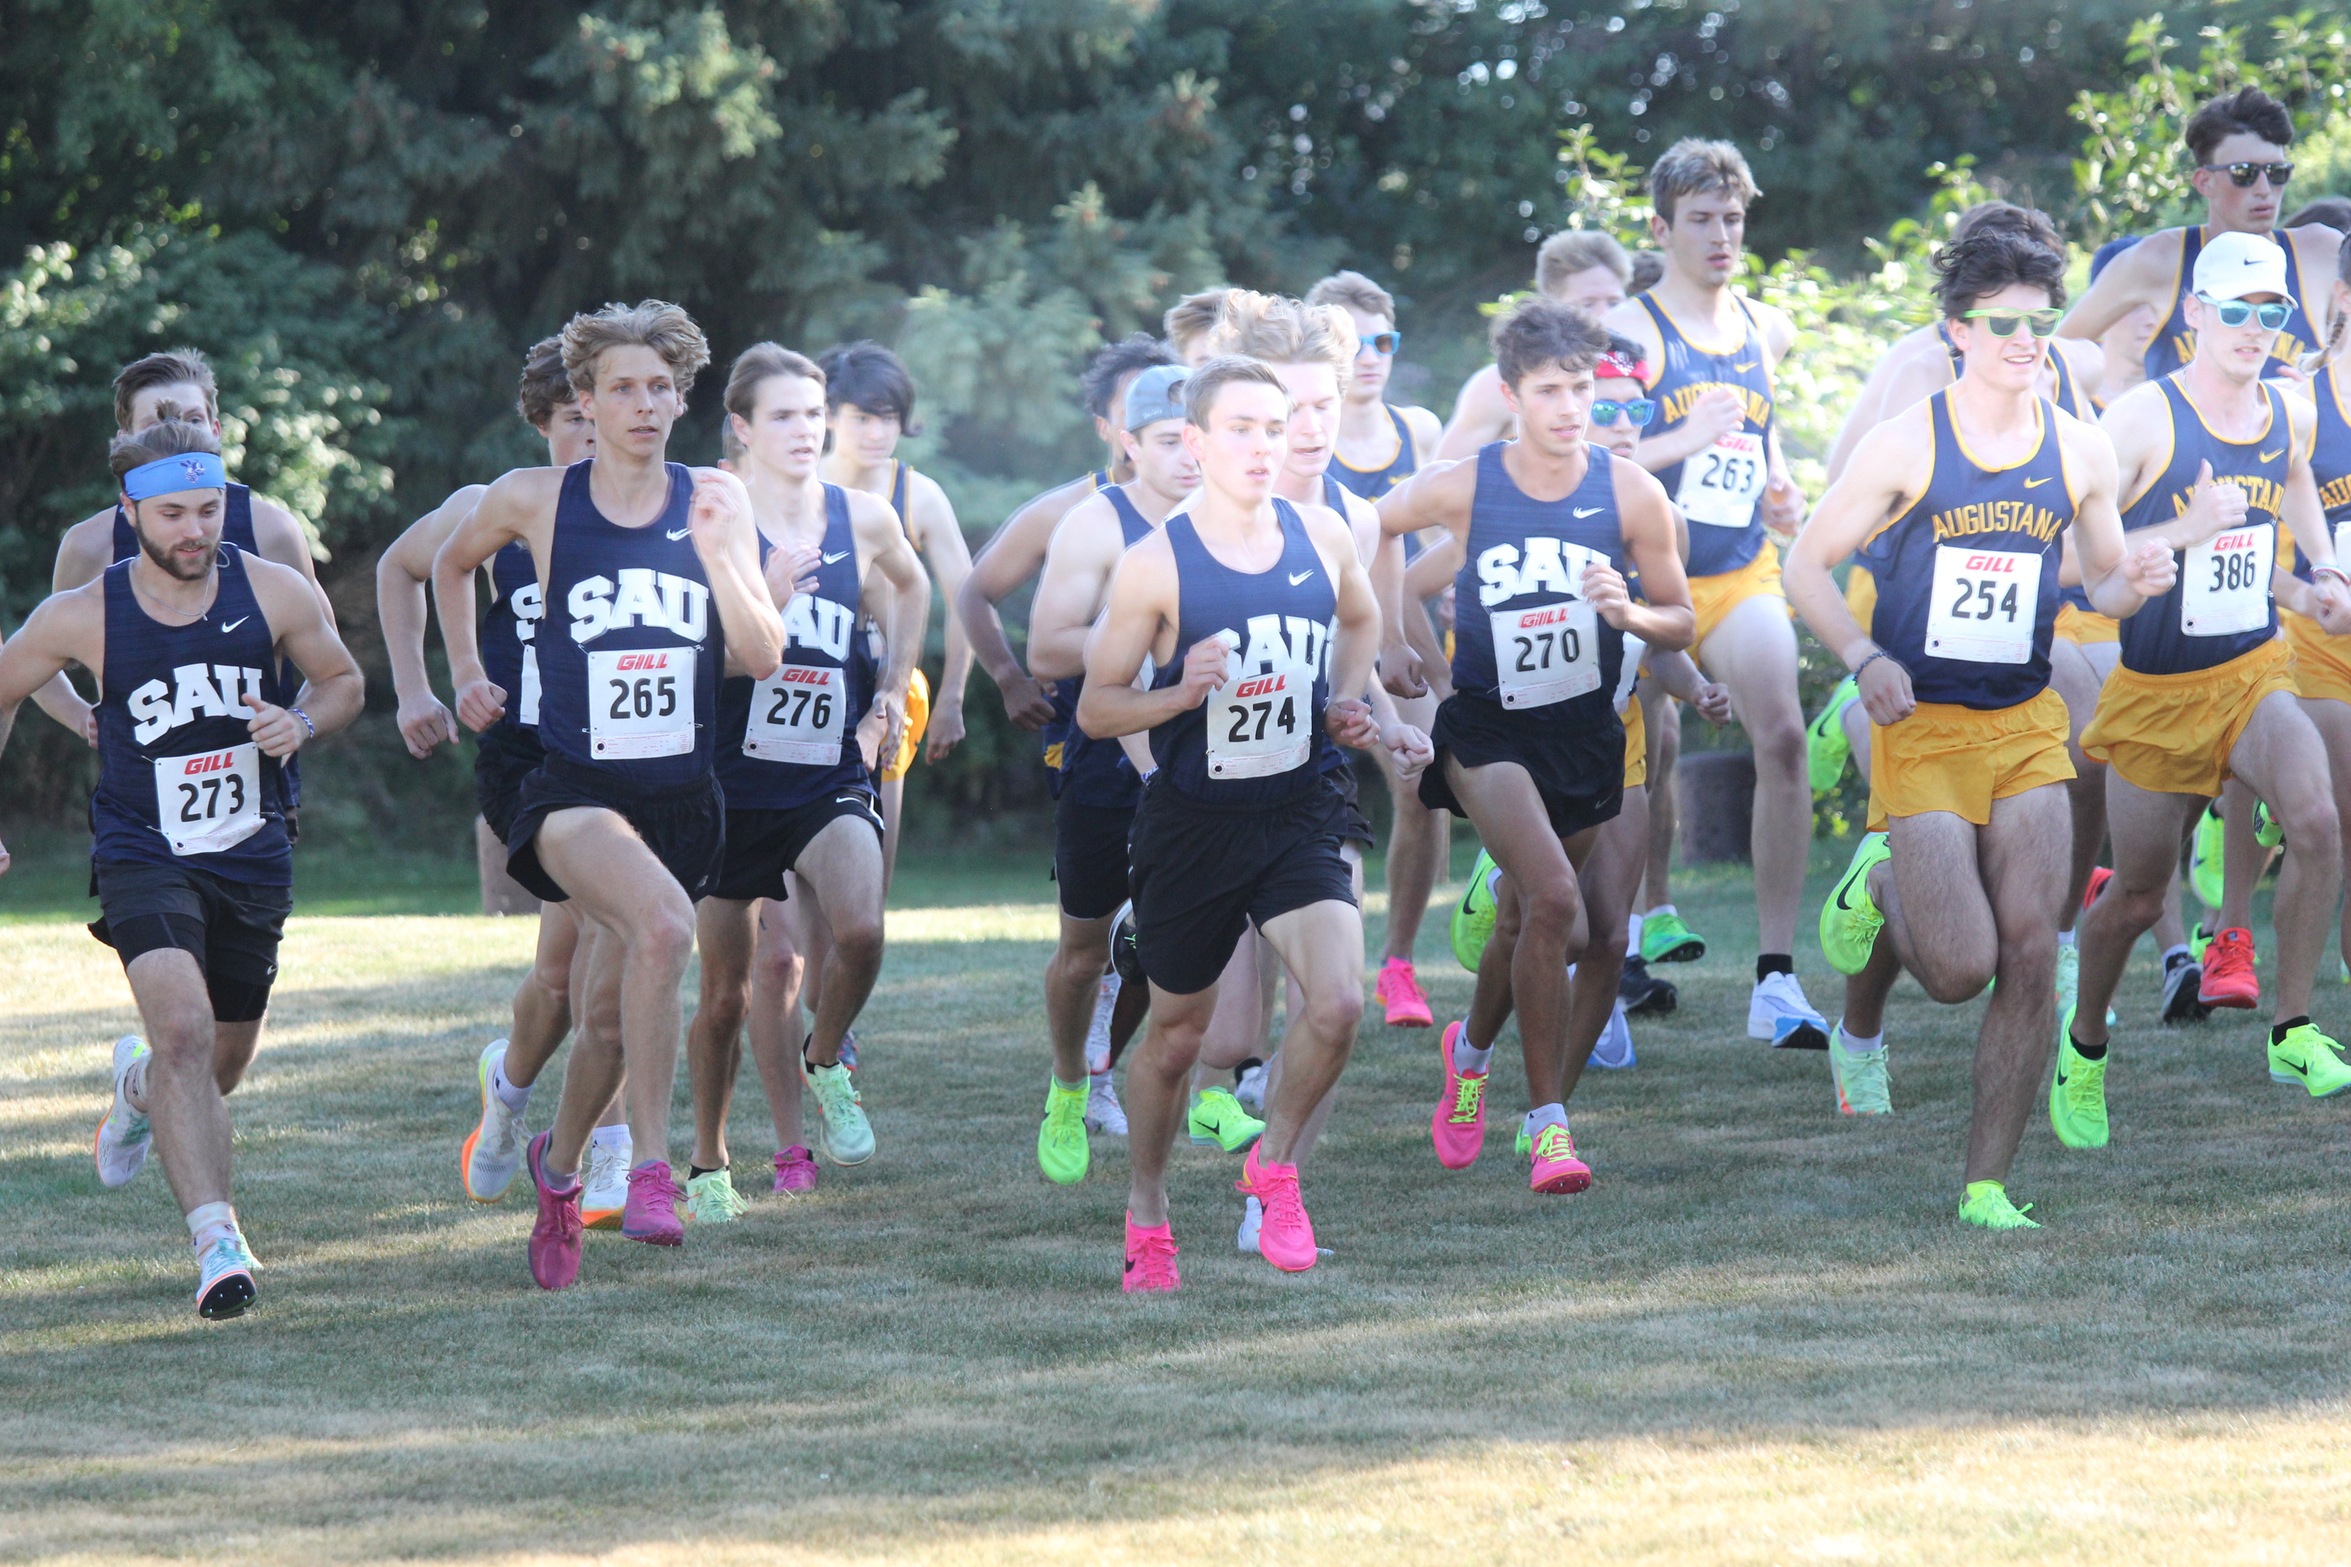 St. Ambrose opens cross country season at Emeis Park